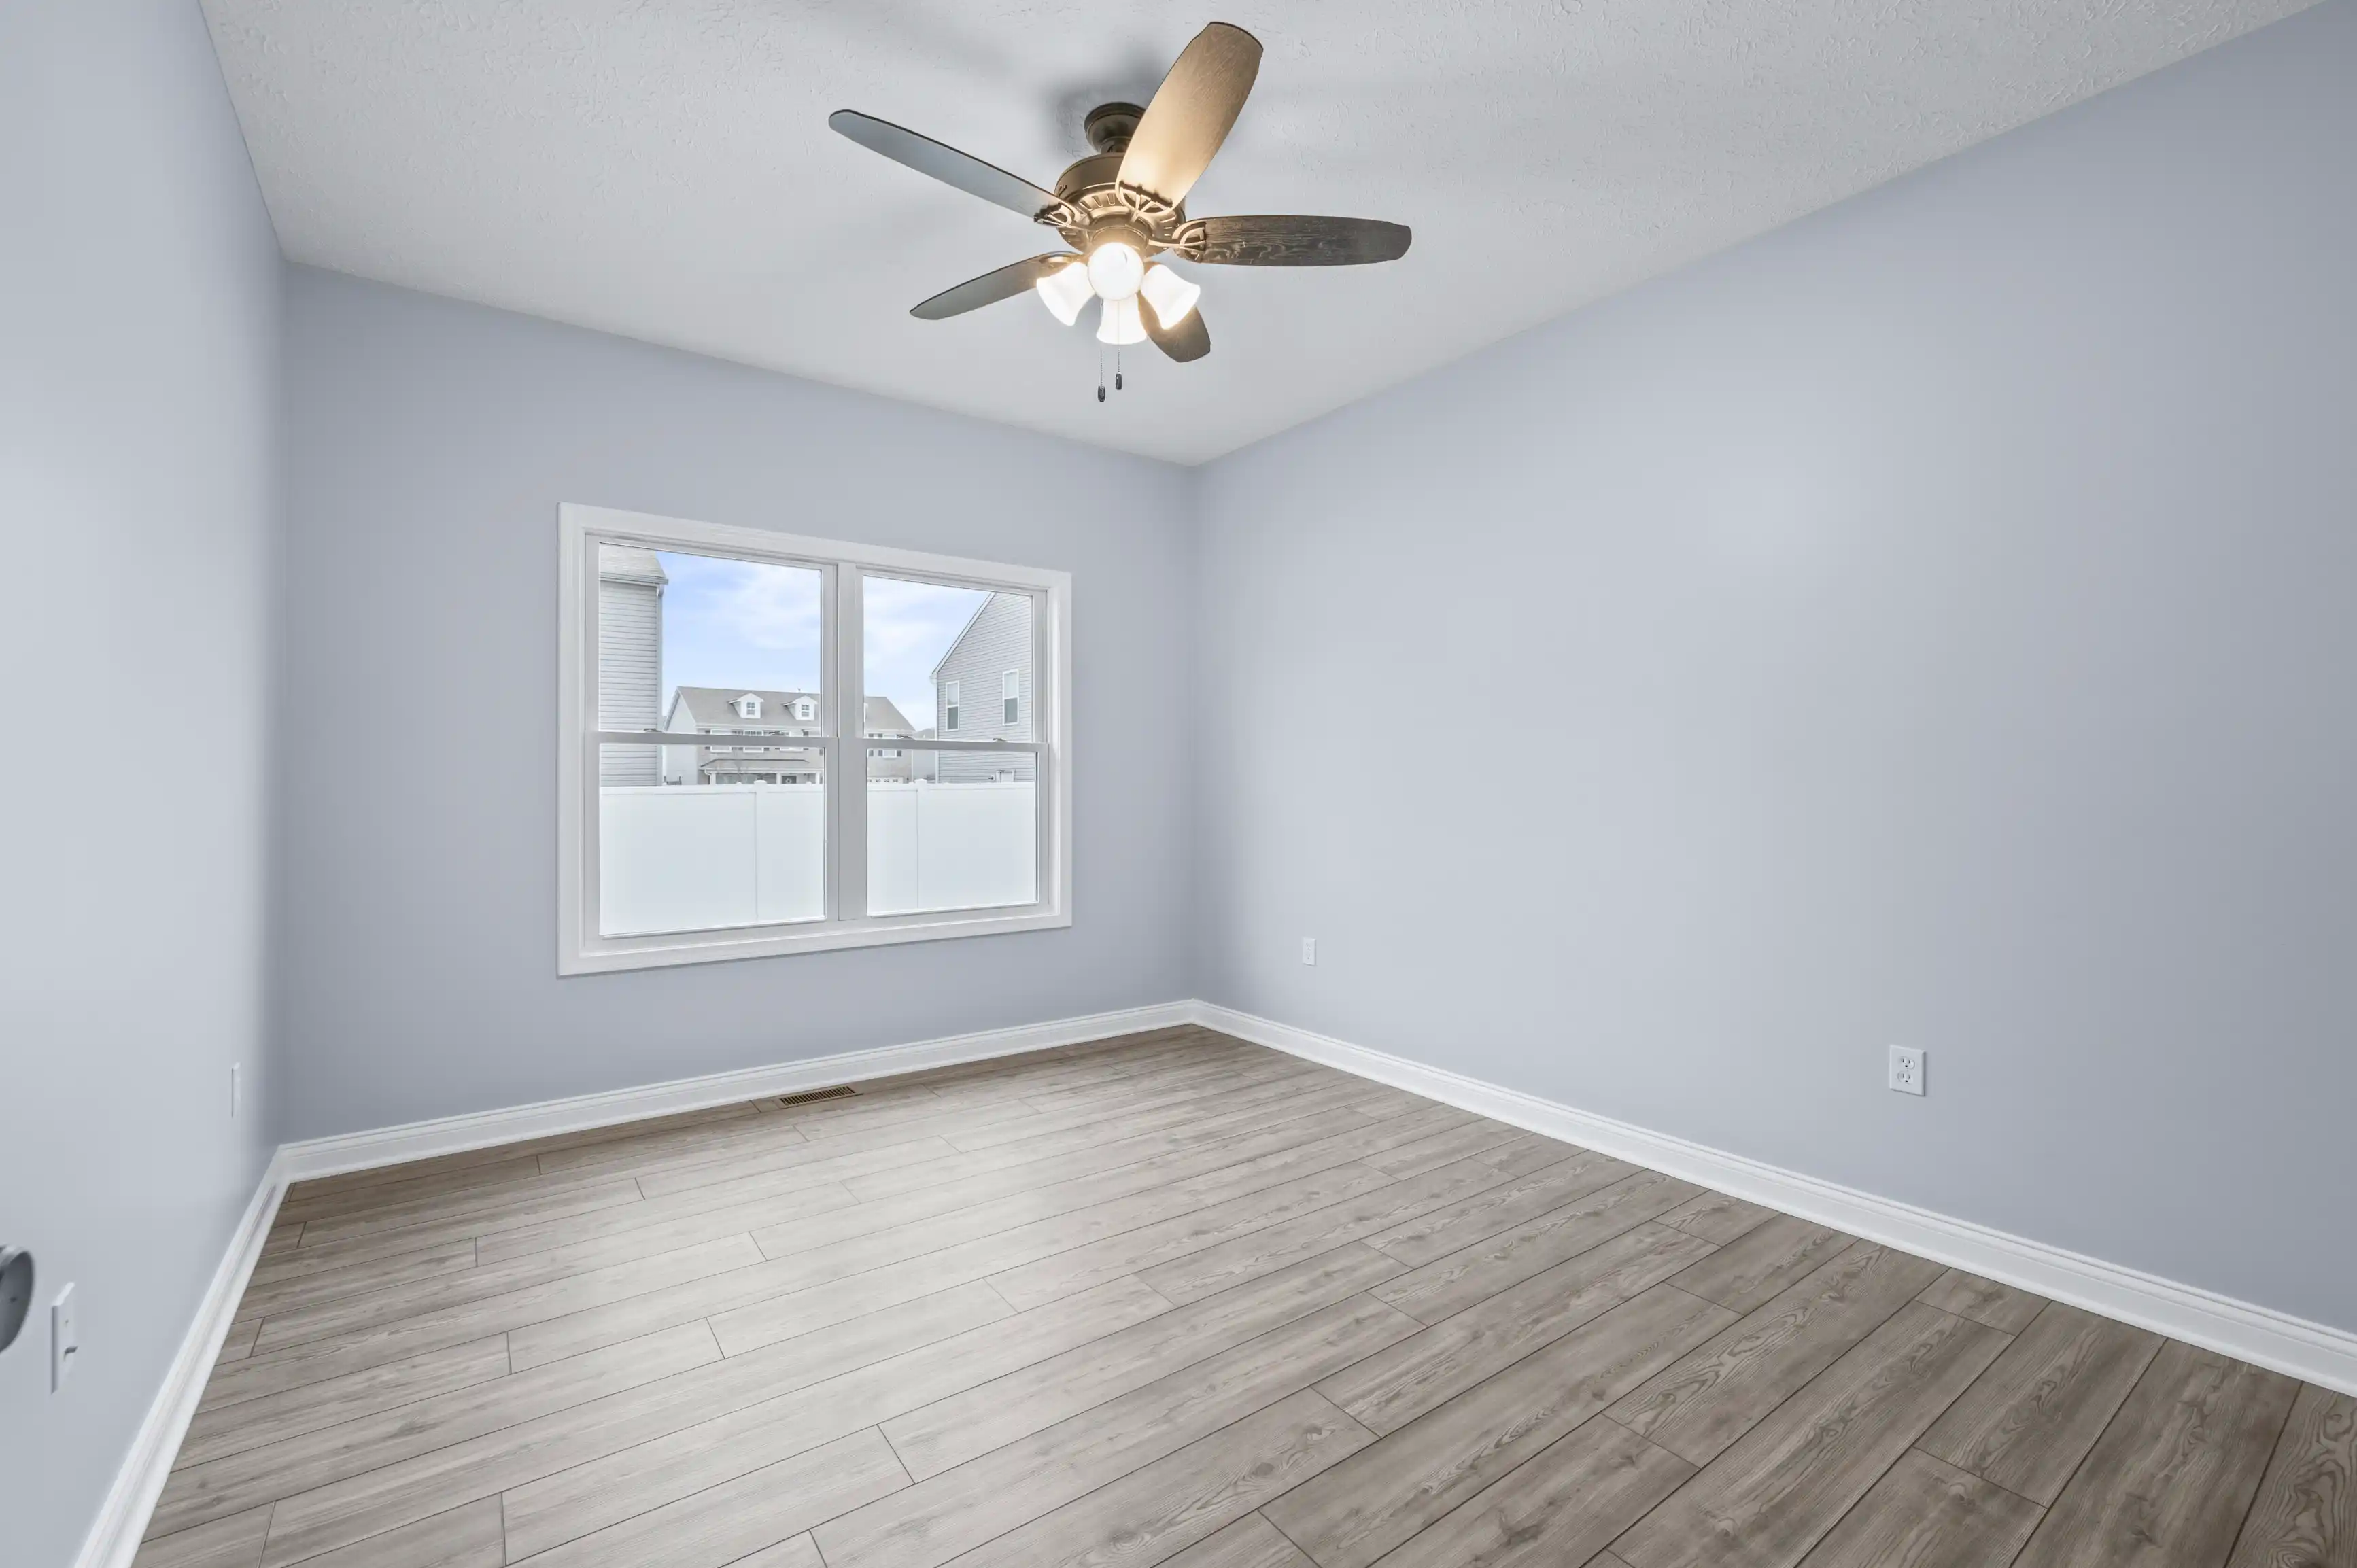 Empty room with light grey walls, ceiling fan with lights, and wood laminate flooring, featuring a large window with a view of neighboring houses.